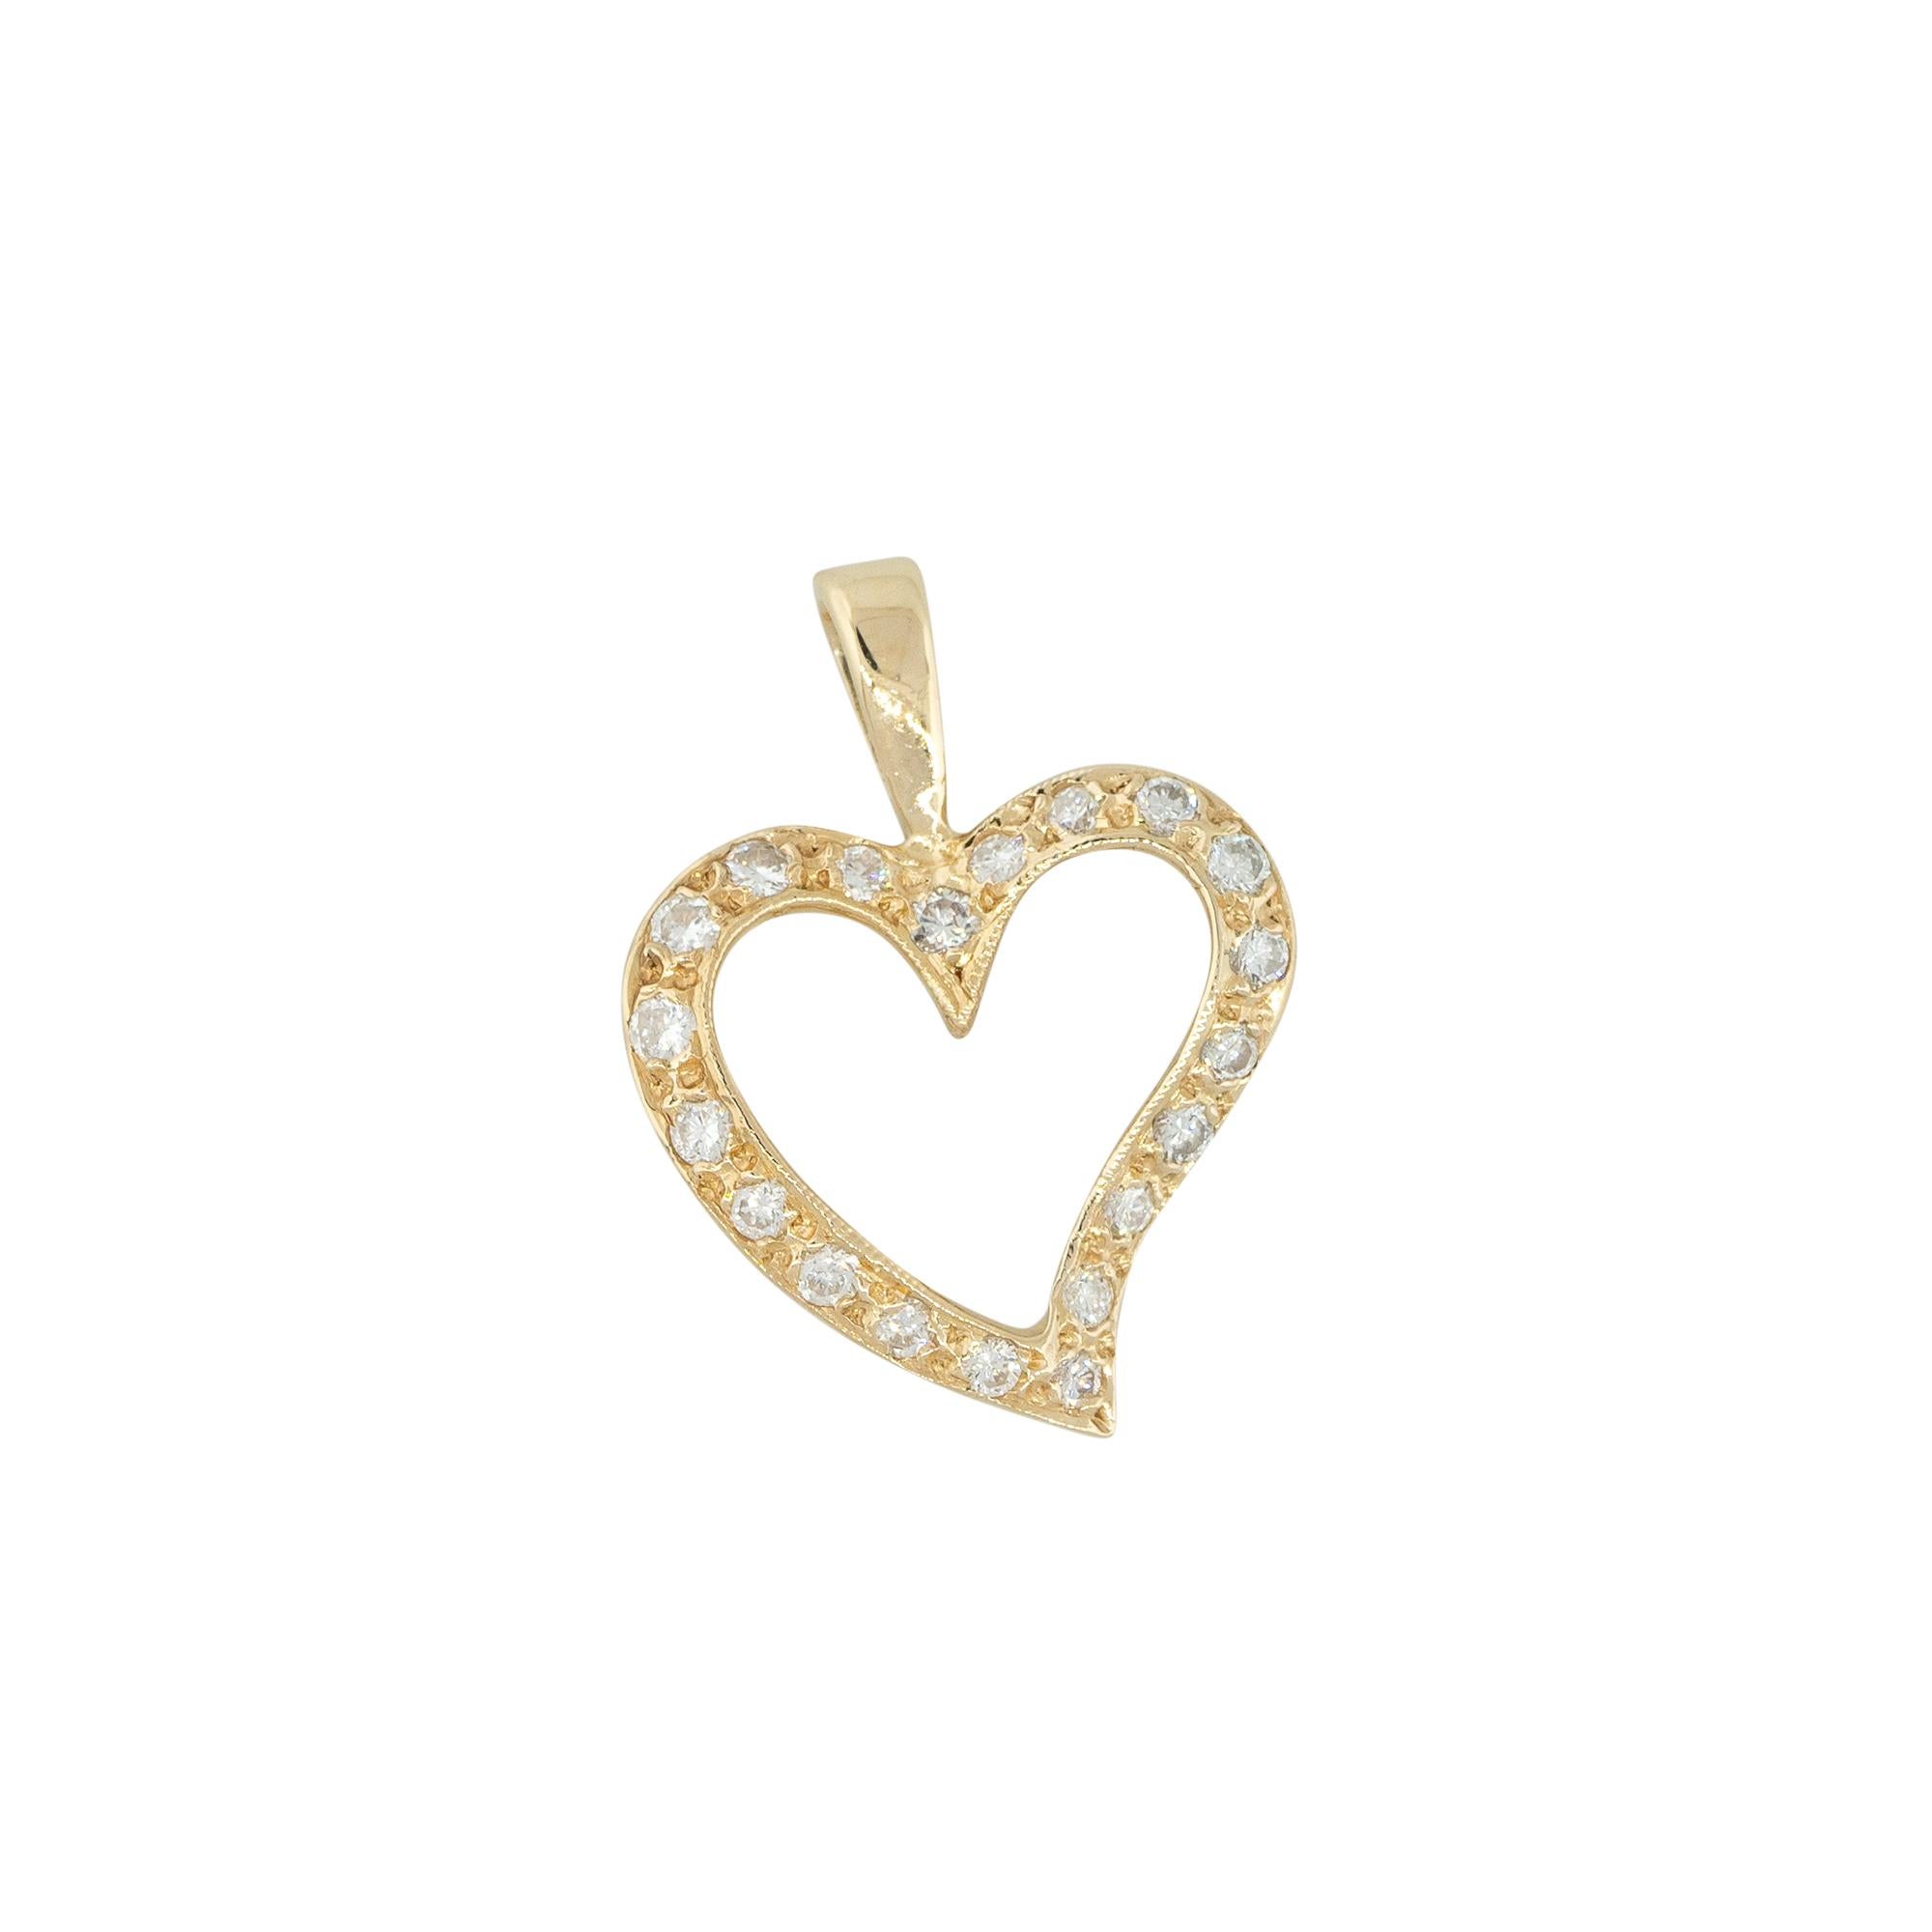 18k Yellow Gold 0.23ctw Diamond Heart Pendant

Material: 18k Yellow Gold
Diamond Details: Approximately 0.23ctw of Diamonds
Item Weight: 1.8g (1.2dwt)
Item Dimensions: 16.11mm x 4.88mm x 15.83mm
Additional Details: This item also comes with a